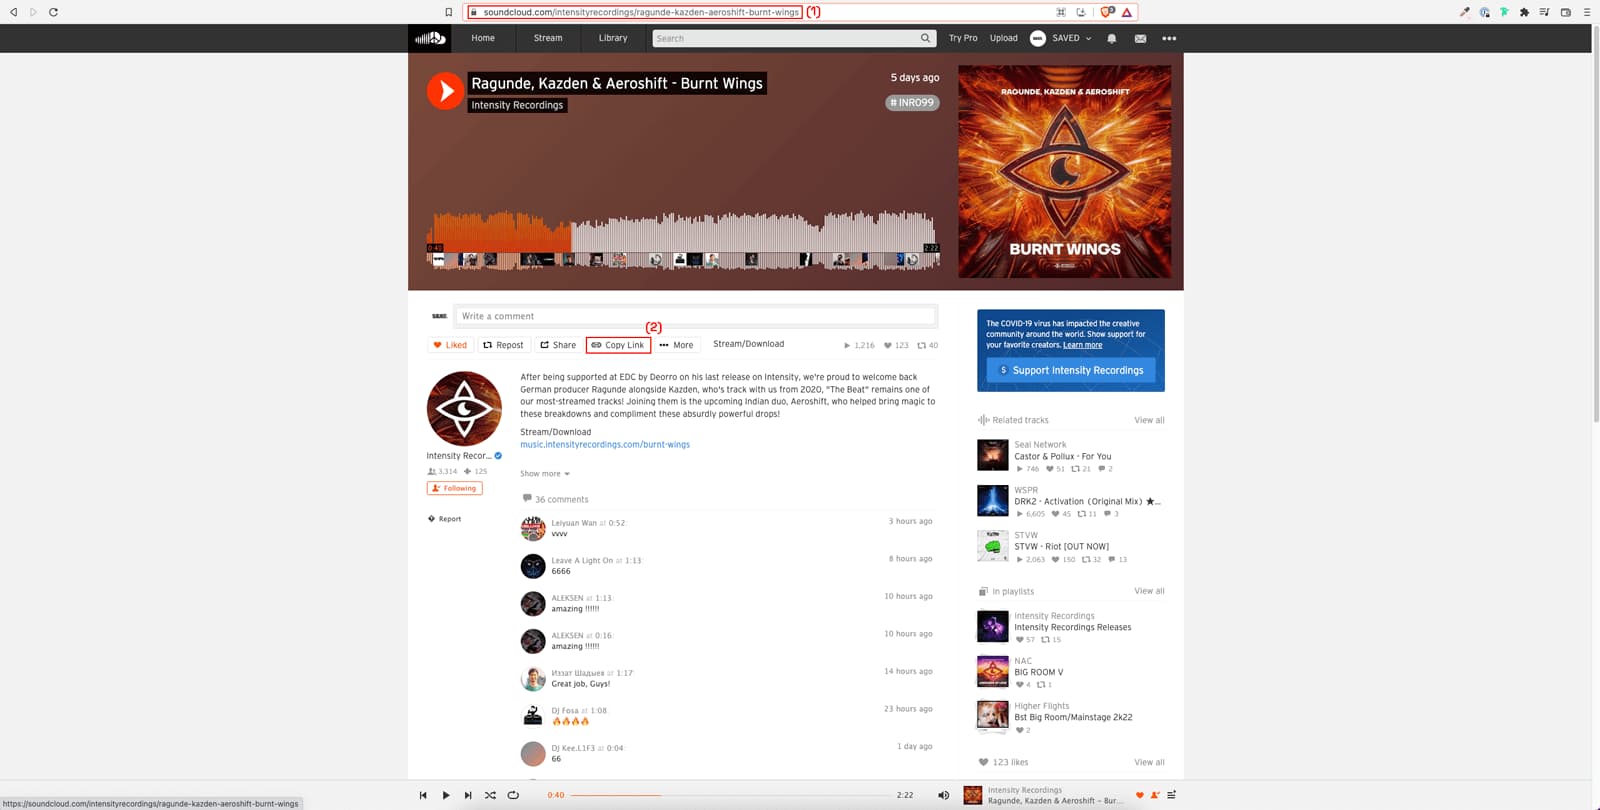 How to download Soundcloud songs?